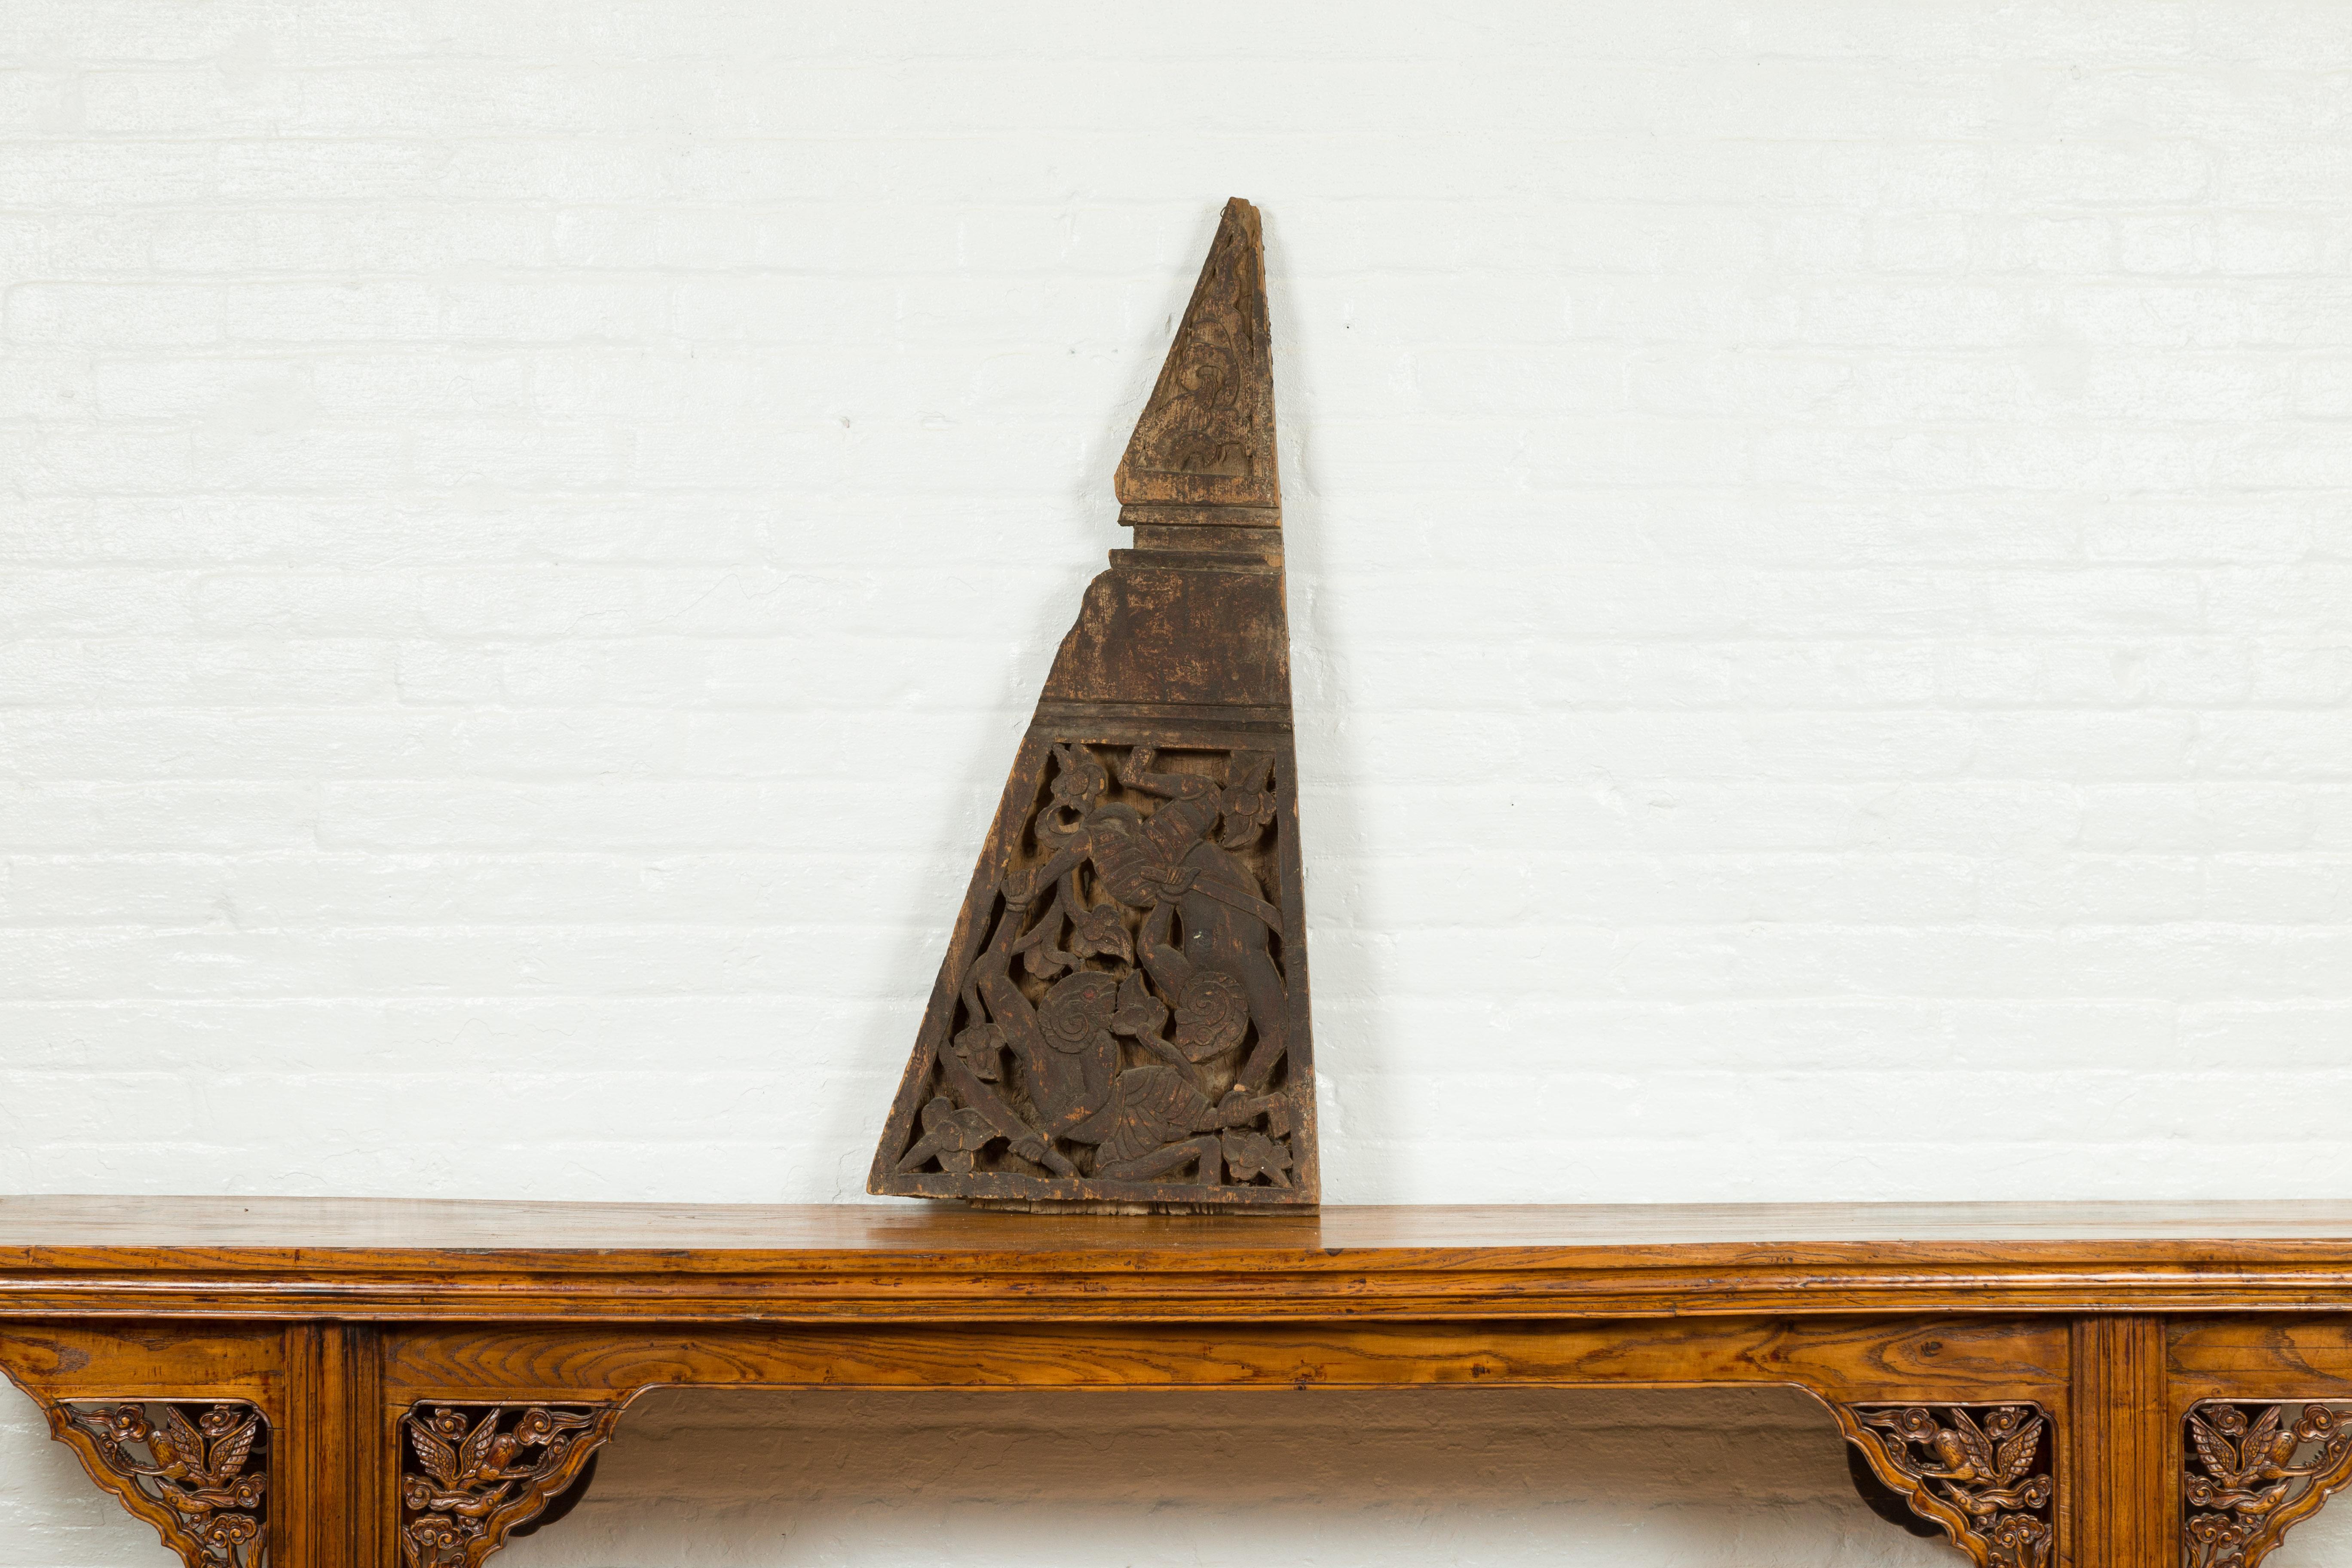 An antique Indonesian architectural hand carved wooden fragment from the 19th century, with mythical figures and triangular shape. Created in Indonesia during the 19th century, this architectural fragment features a triangular shape adorned on the